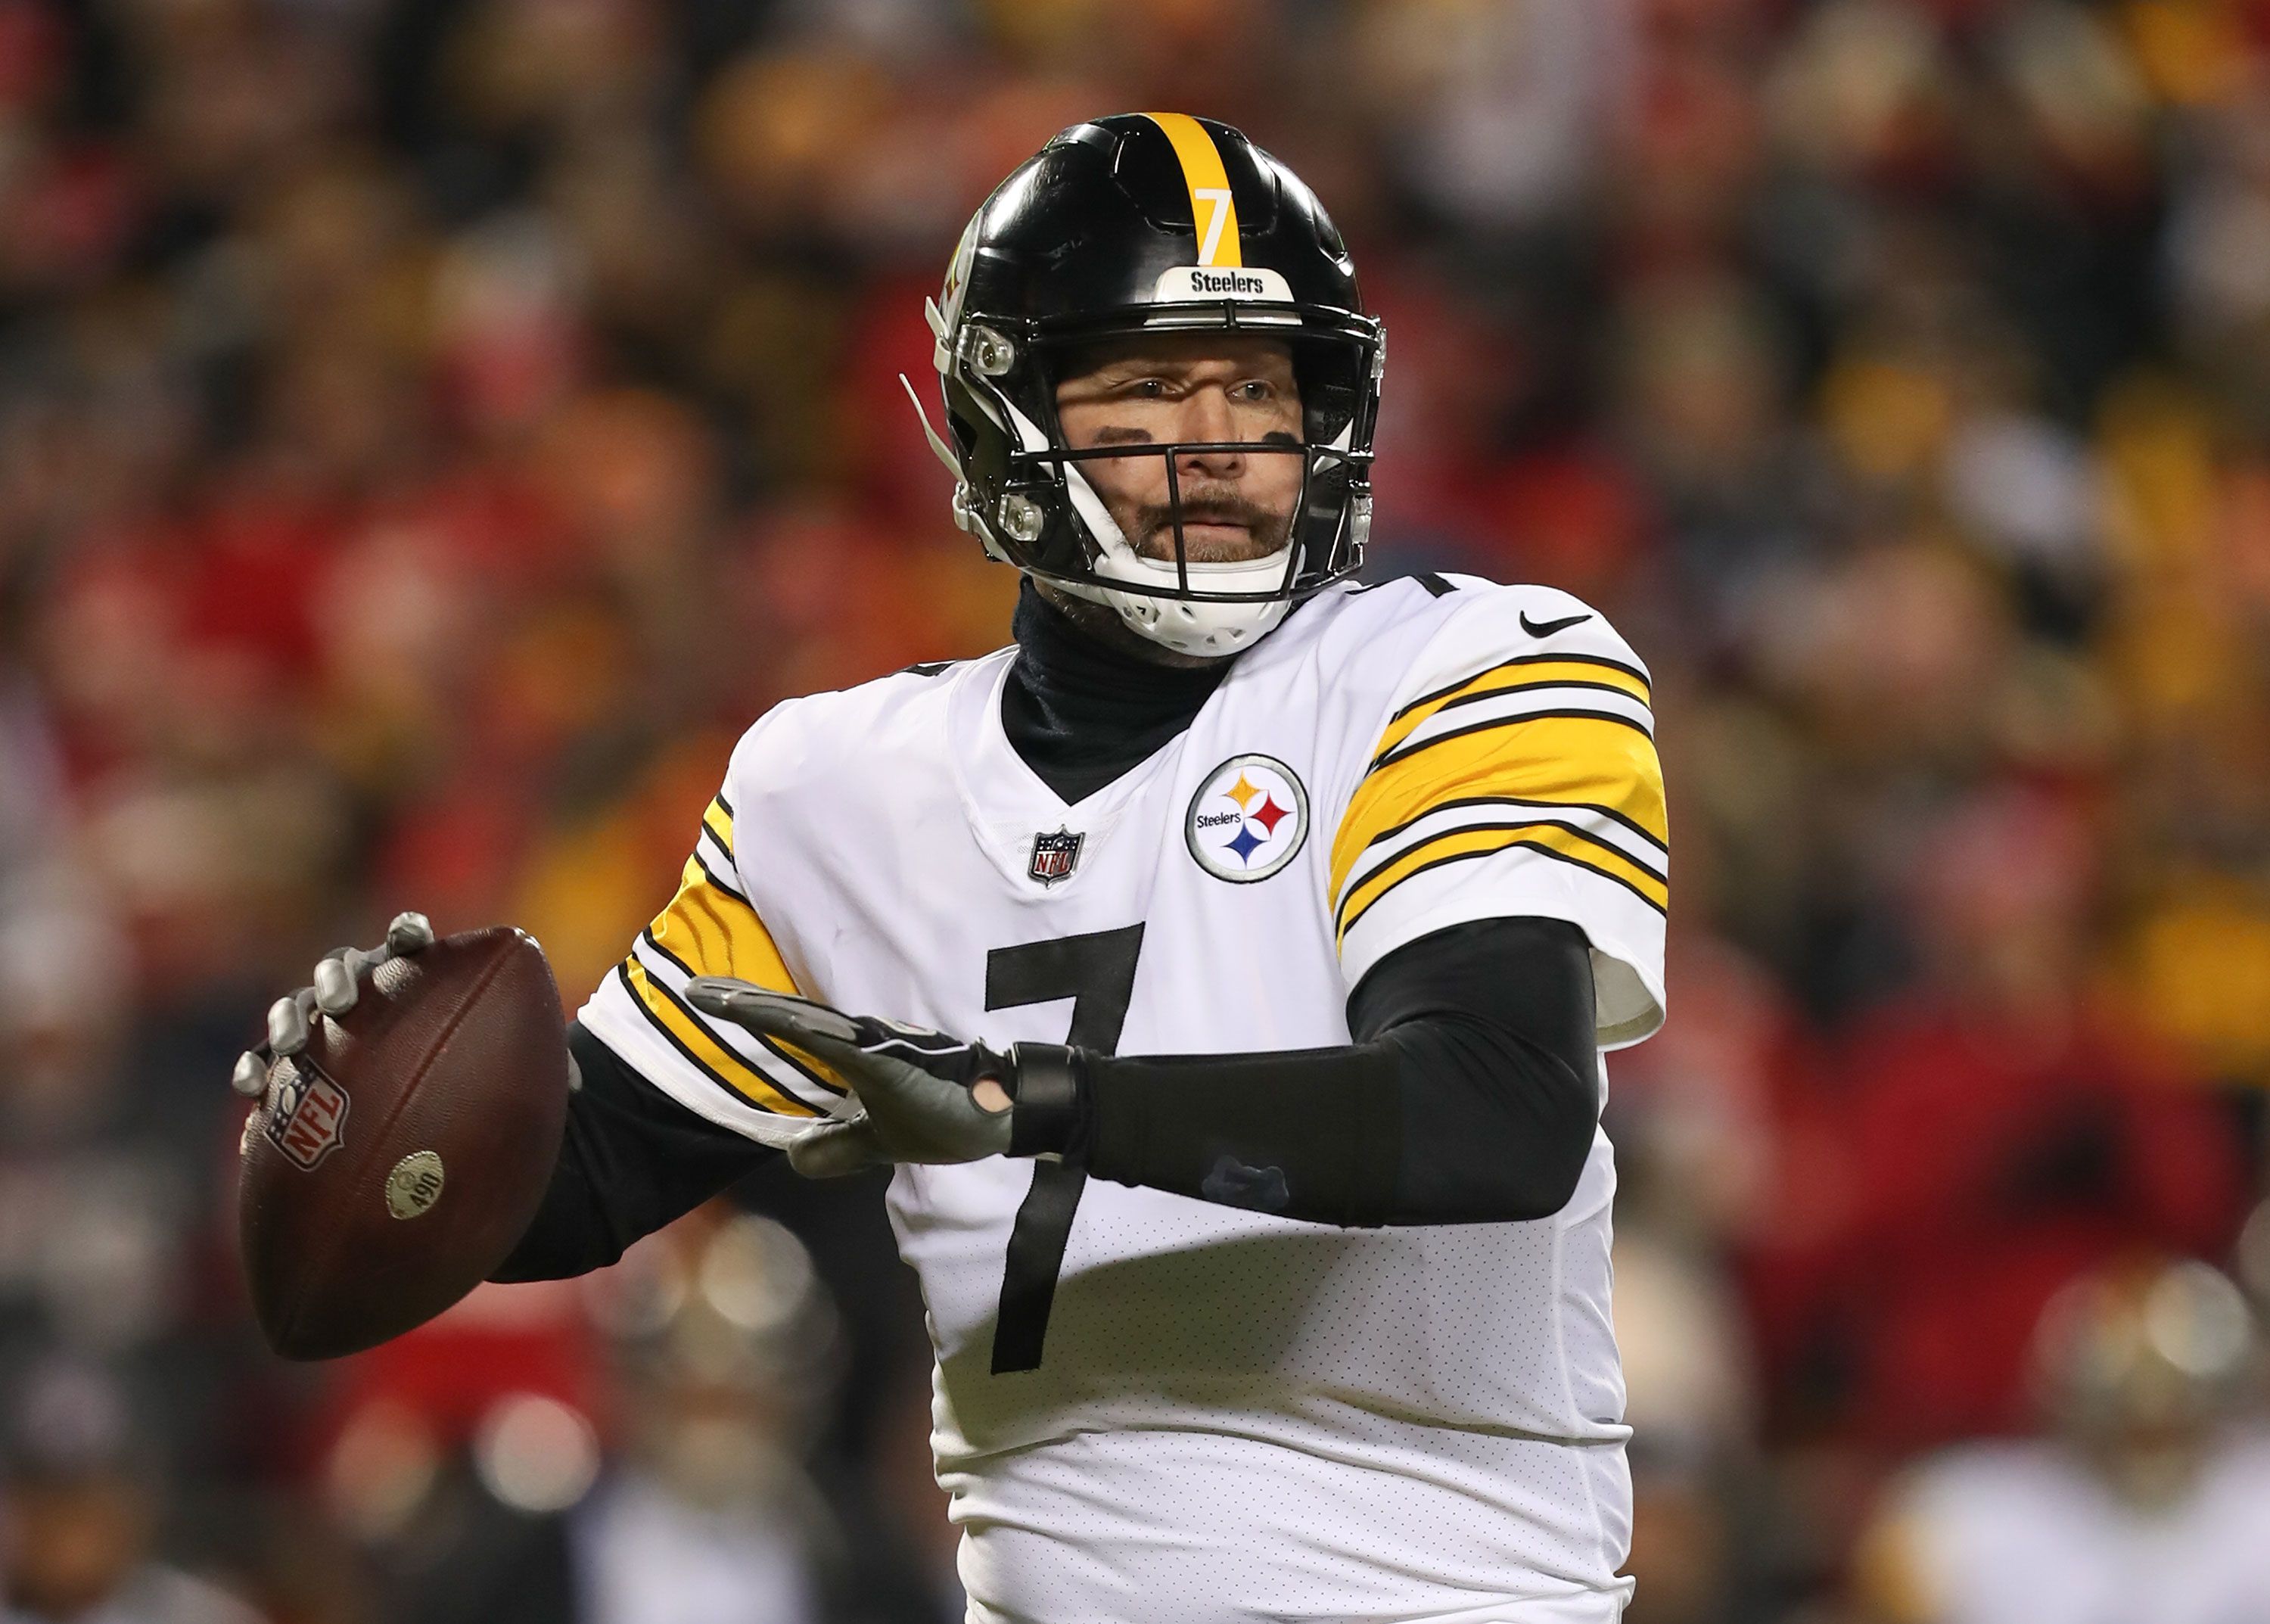 Steelers and Cardinals head to the Super Bowl